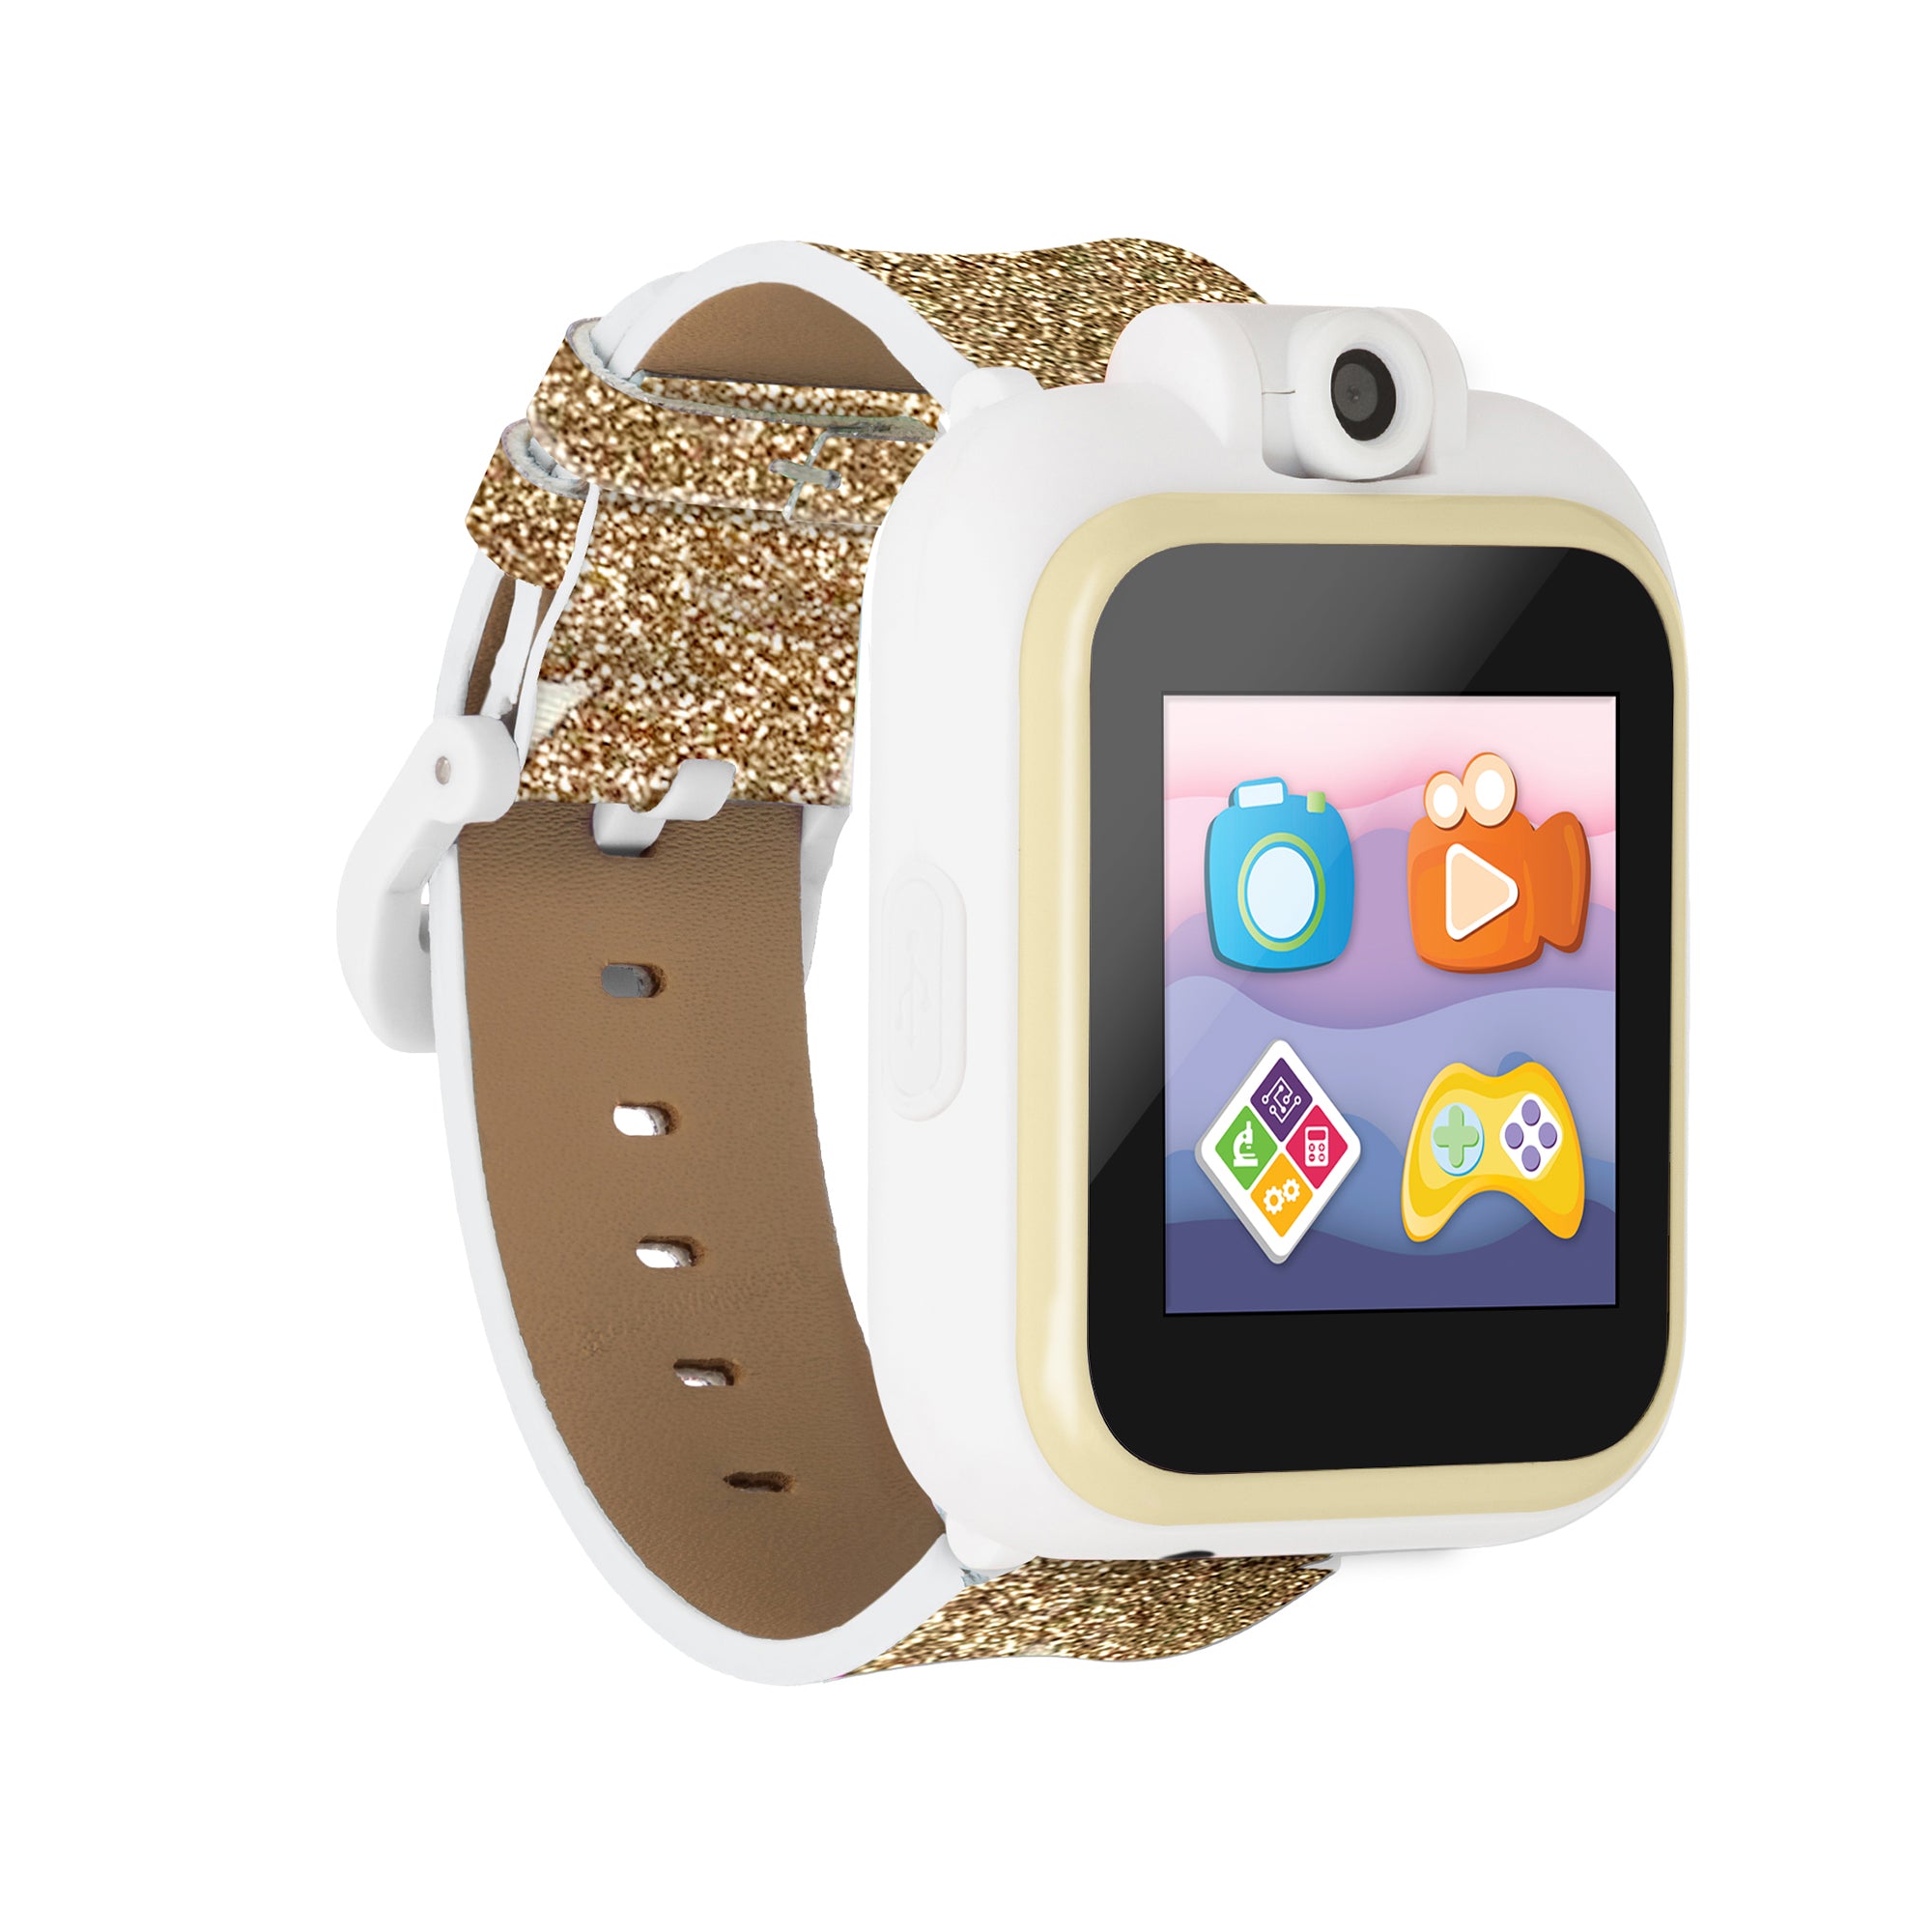 PlayZoom 2 Kids Smartwatch with Headphones: Gold Star Print affordable smart watch with headphones